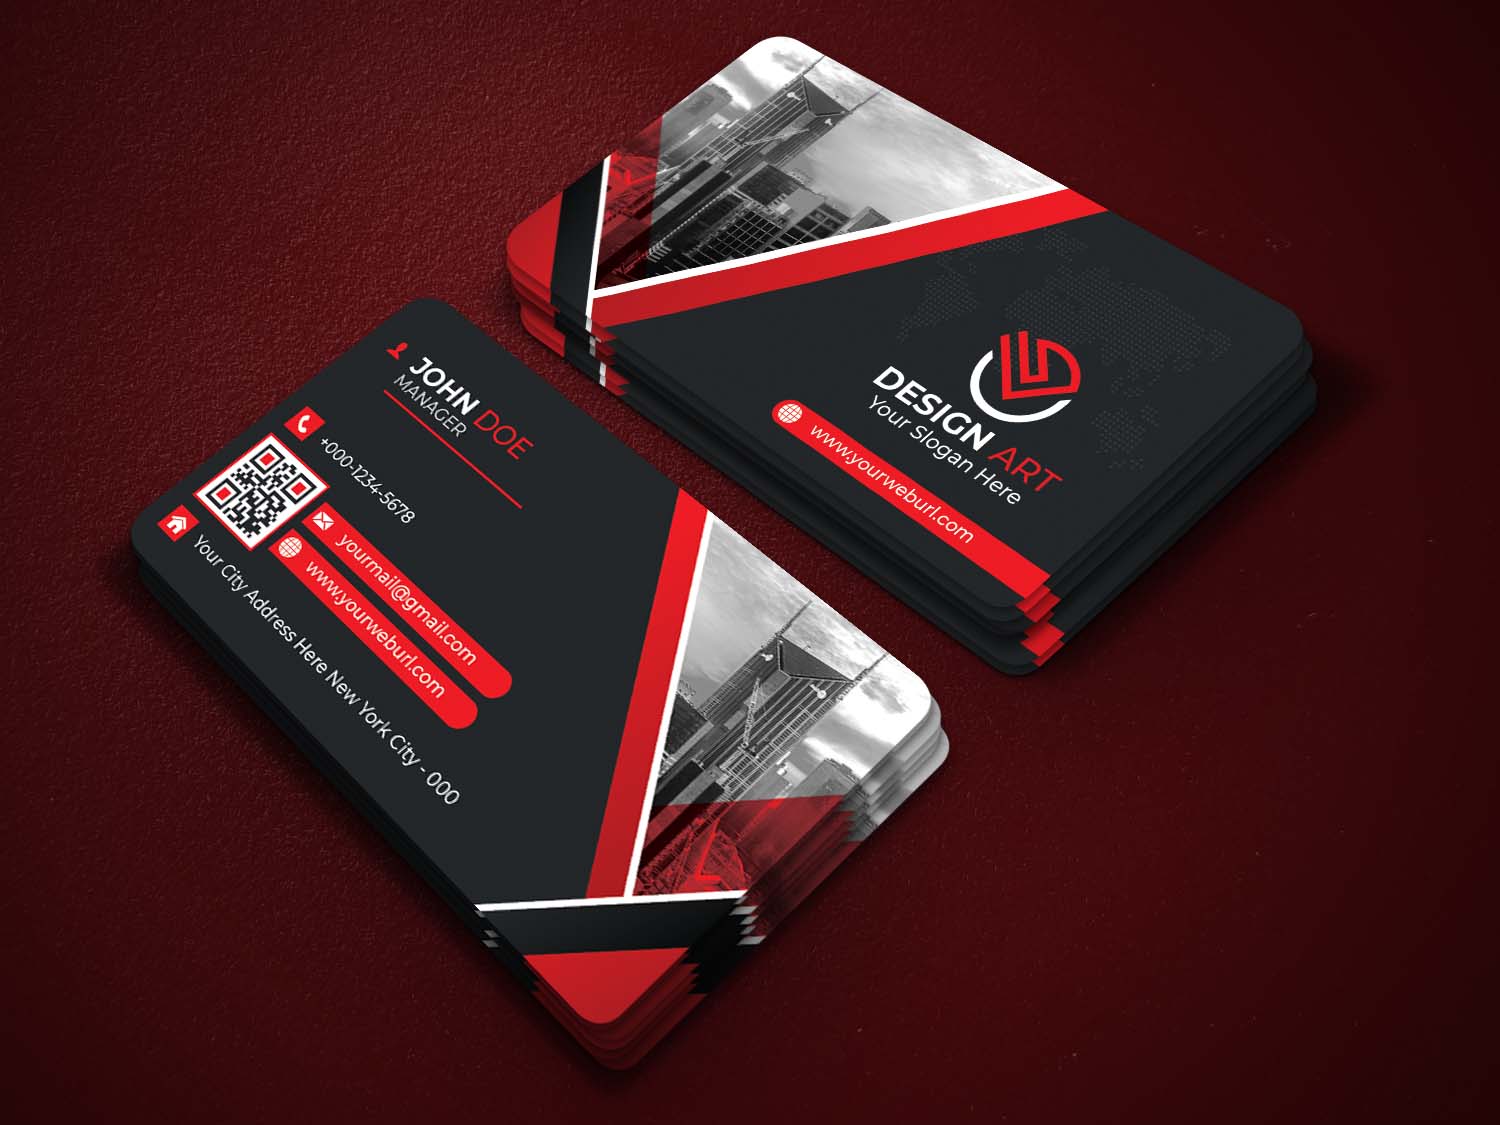 Red and black business card on a red surface.